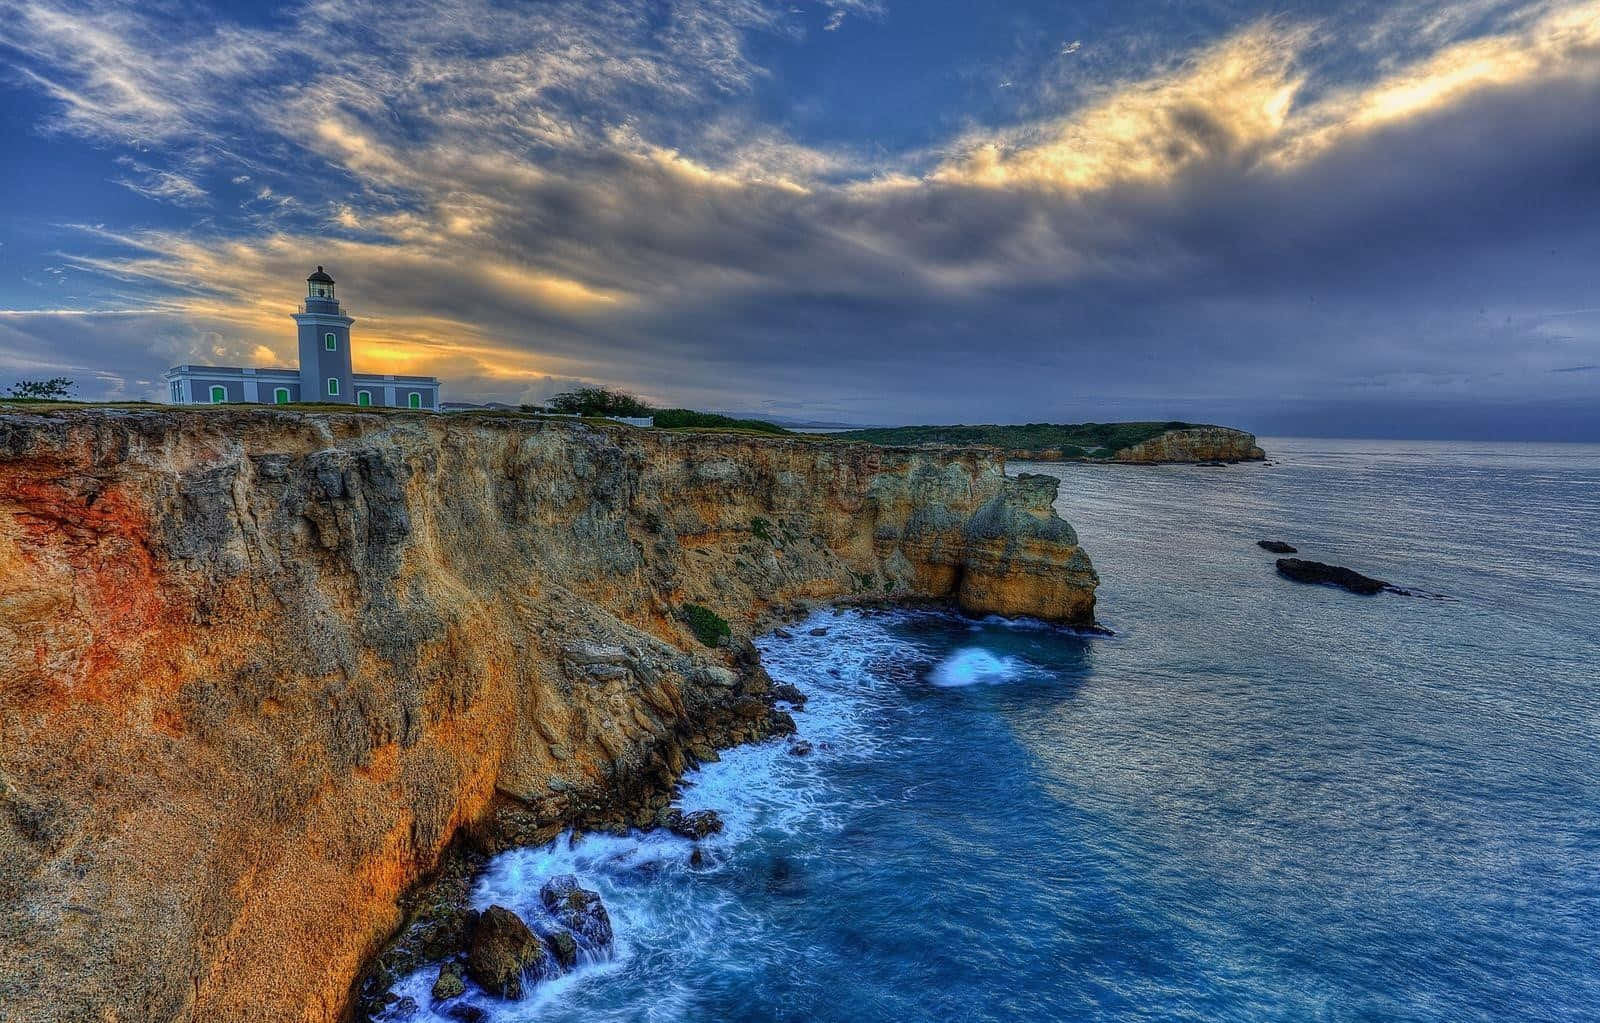 Stunning view of the iconic El Morro fortress in Puerto Rico